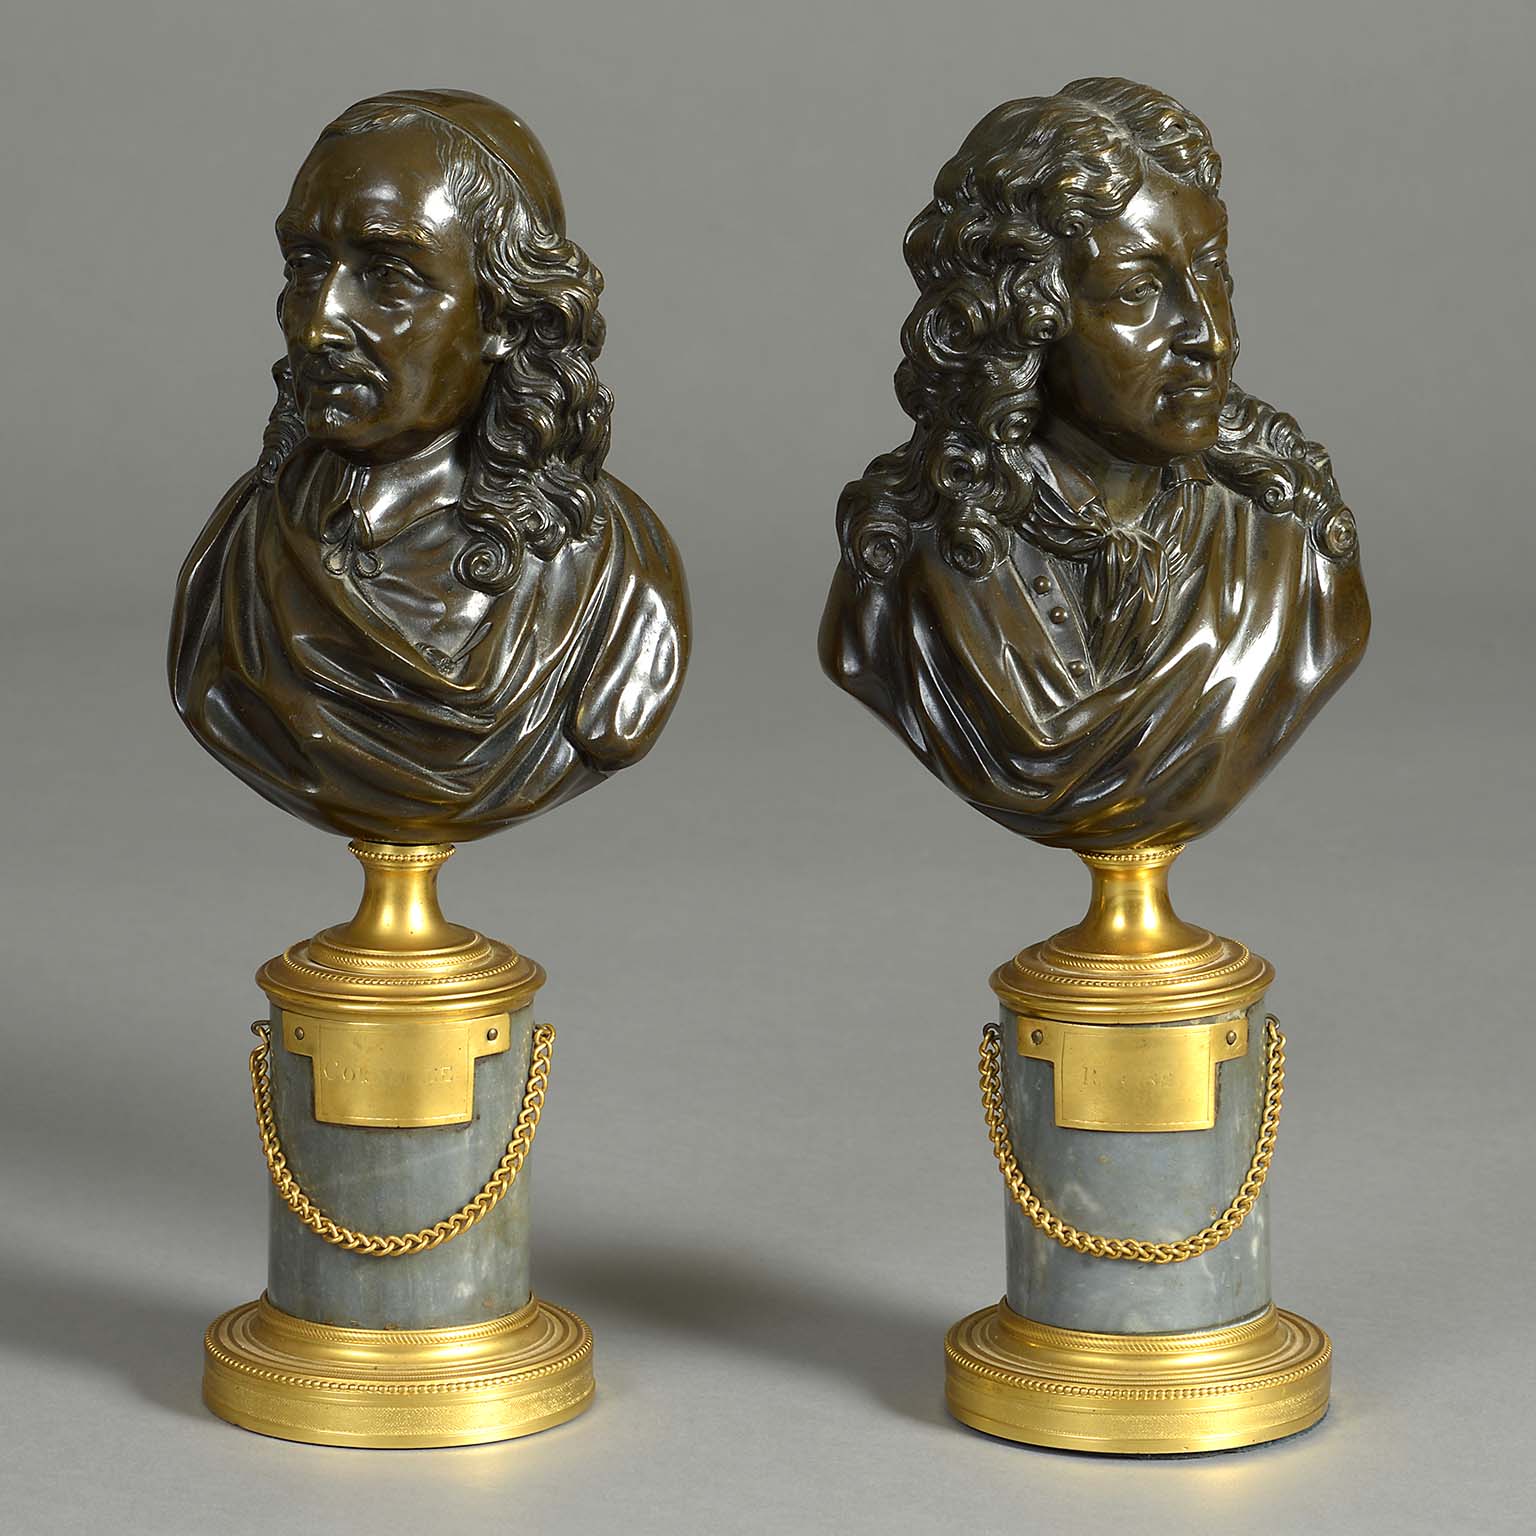 Pair of bronze Busts of Racine and Corneille